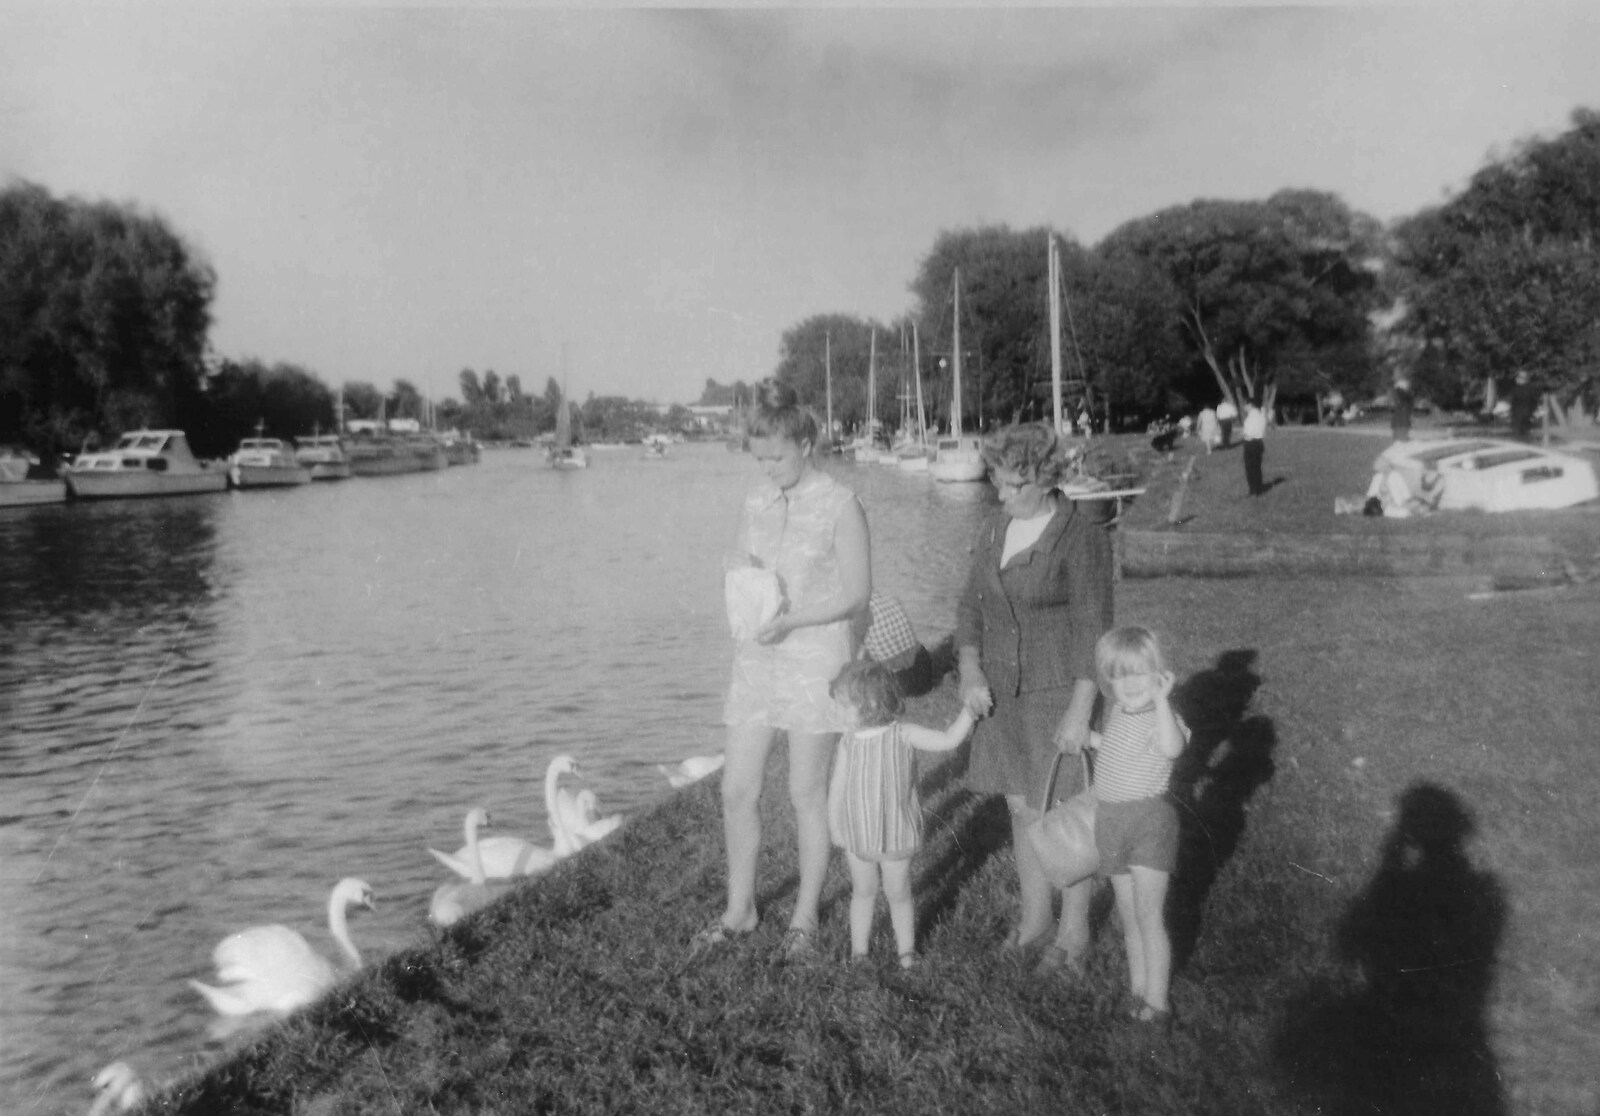 Mother, Sis, Granny and Nosher by the River Stour in Christchurch Park, 1970 from Family History: The 1970s, Timperley and Sandbach, Cheshire - 24th January 2020